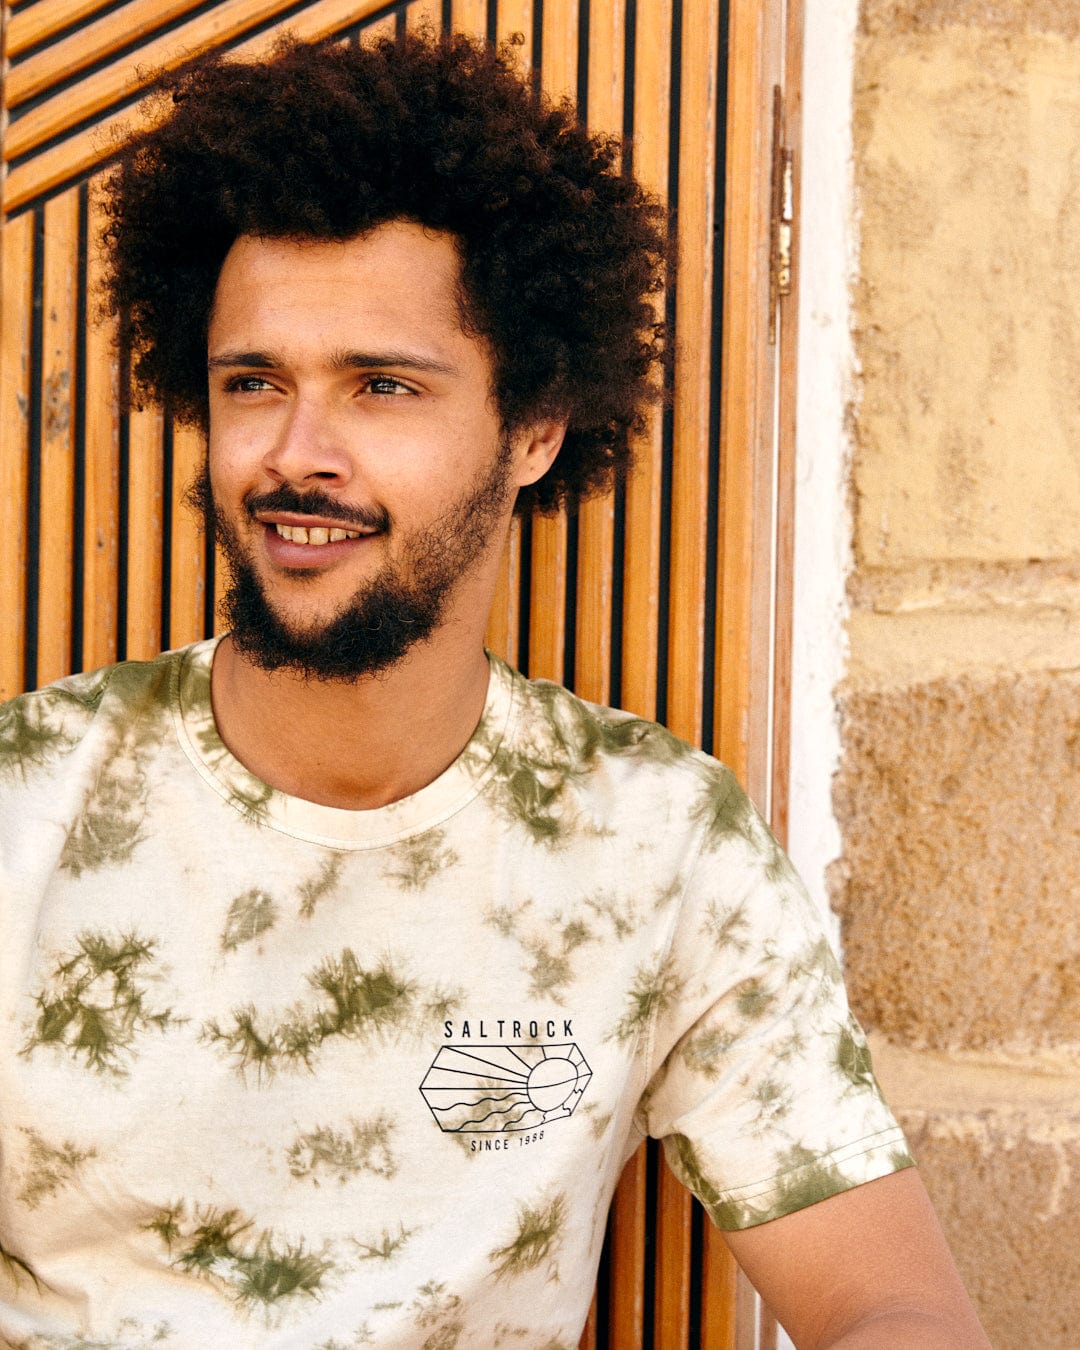 A young man with curly hair, wearing a tie-dye Saltrock Vantage Outline crew neck t-shirt in green, standing against a wall with wooden shutters.